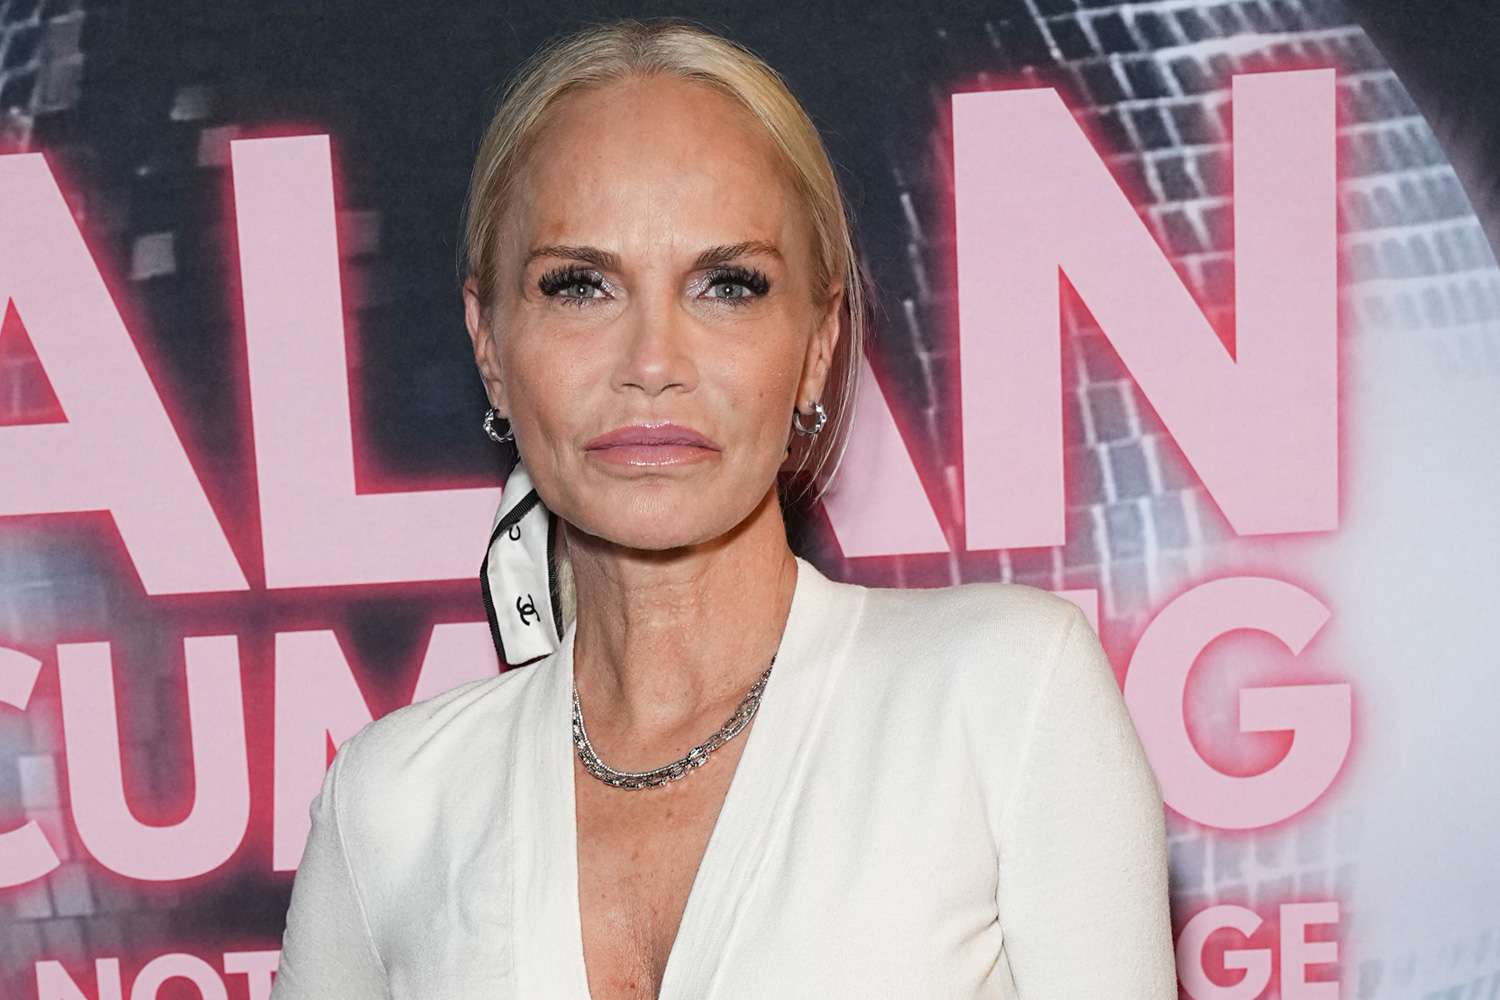 Kristin Chenoweth Reveals She Was ‘Deeply Injured’ as a Survivor of Domestic Abuse